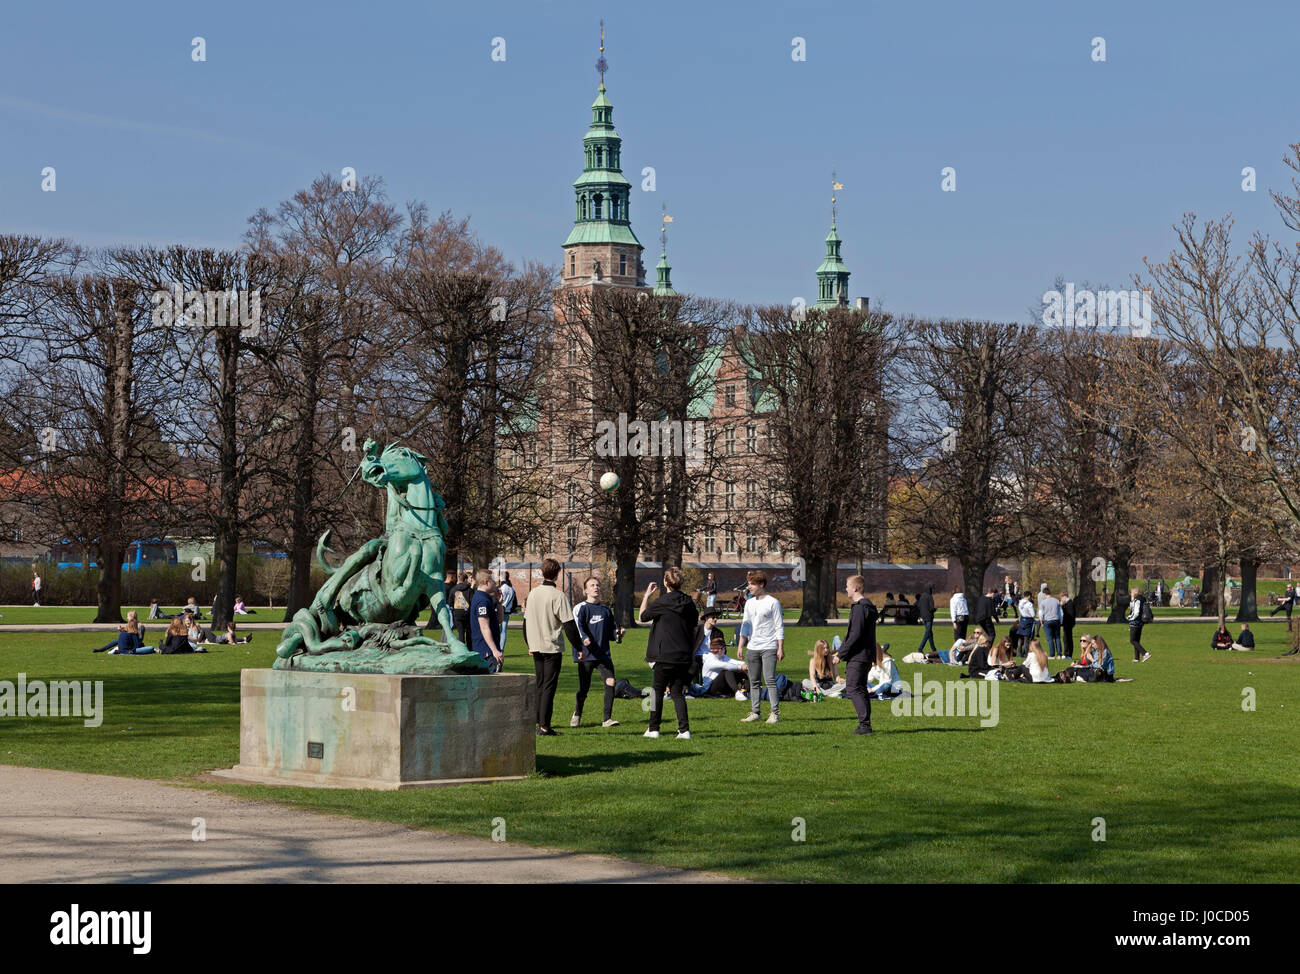 Young people enjoy the warm spring sun on Palm Sunday in Kongens Have, the King's garden, Copenhagen, Denmark. The Rosenborg Castle in the background. Stock Photo